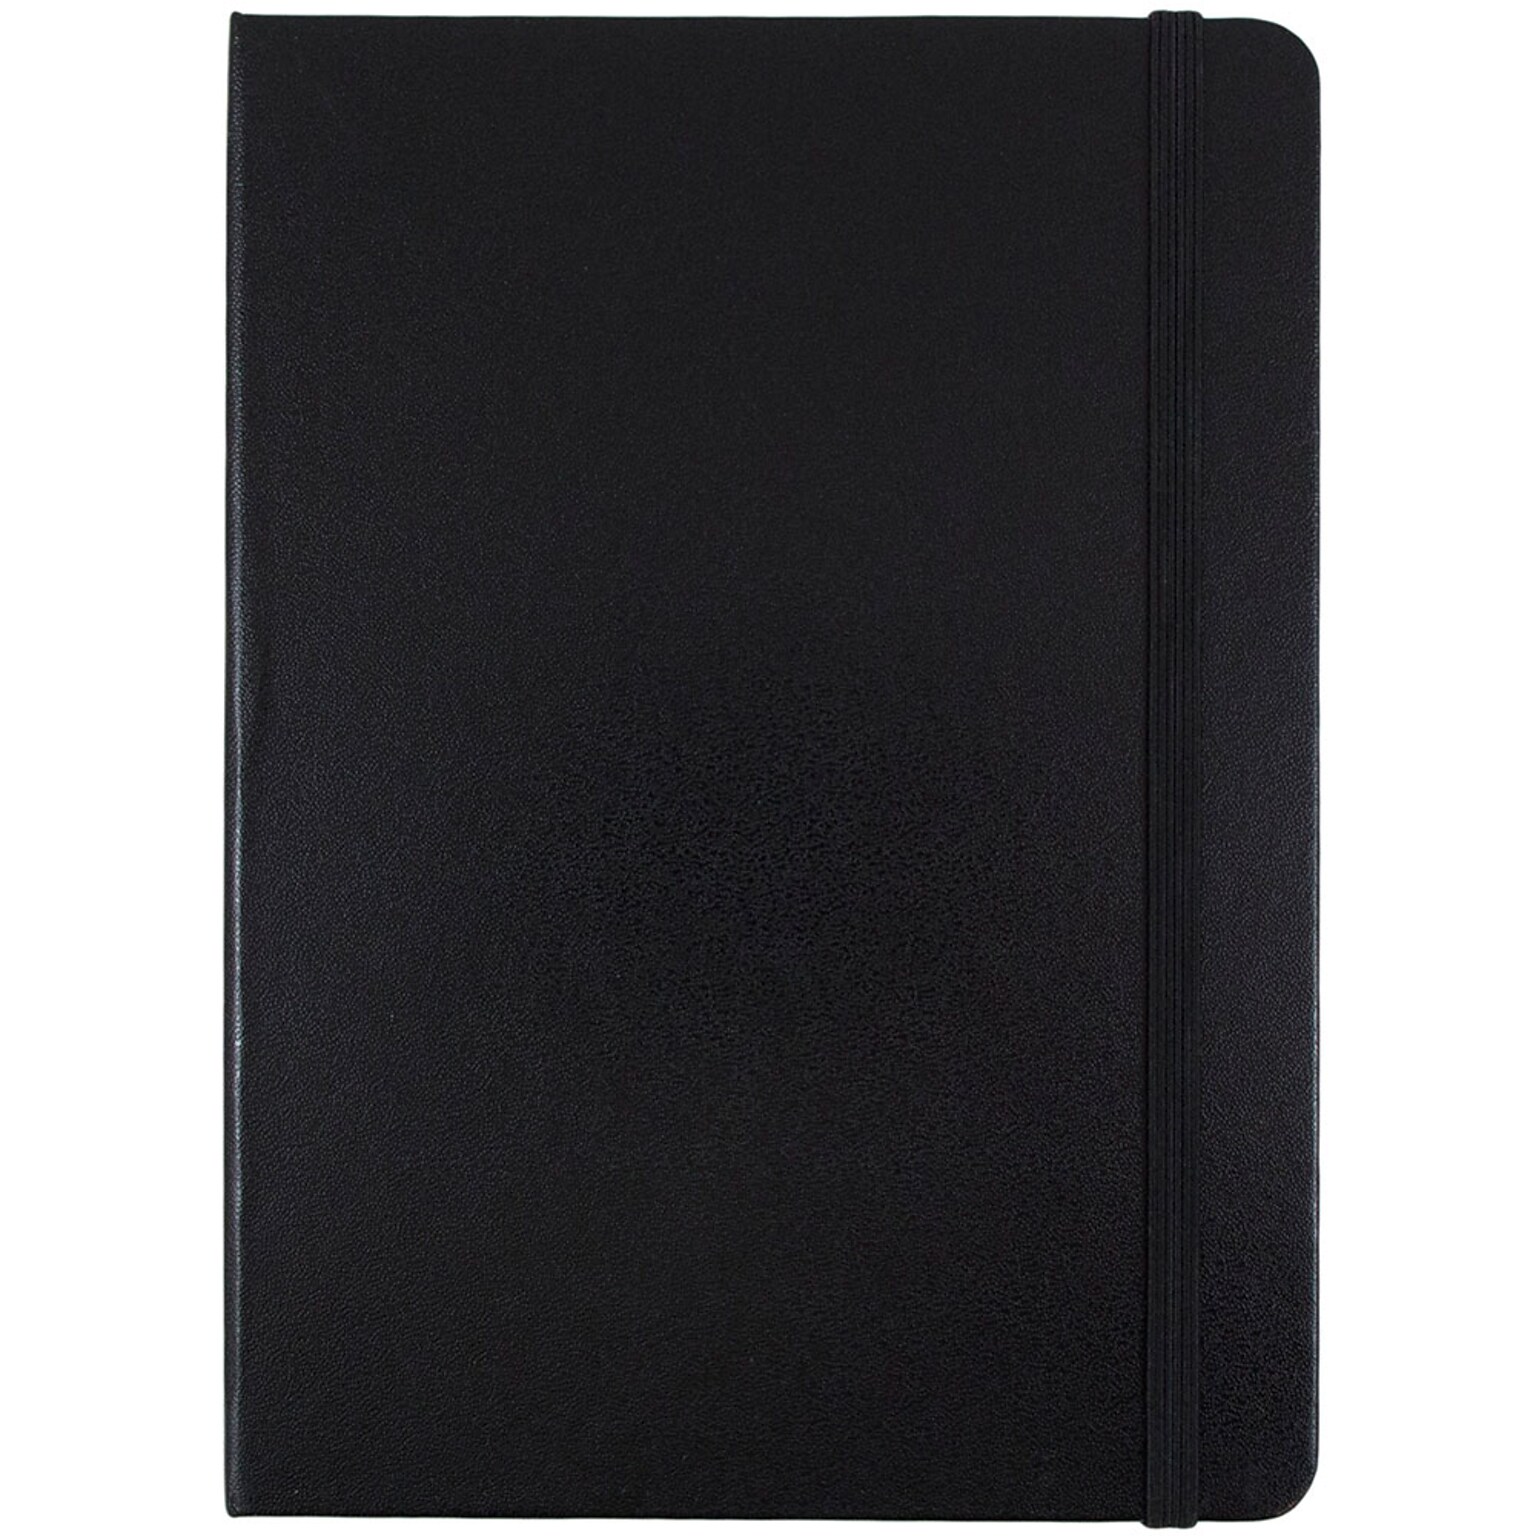 JAM Paper Hardcover Notebook with Elastic, Medium Journal, 5 x 7, Black, 100 Lined Sheets, Sold Individually (340526601)